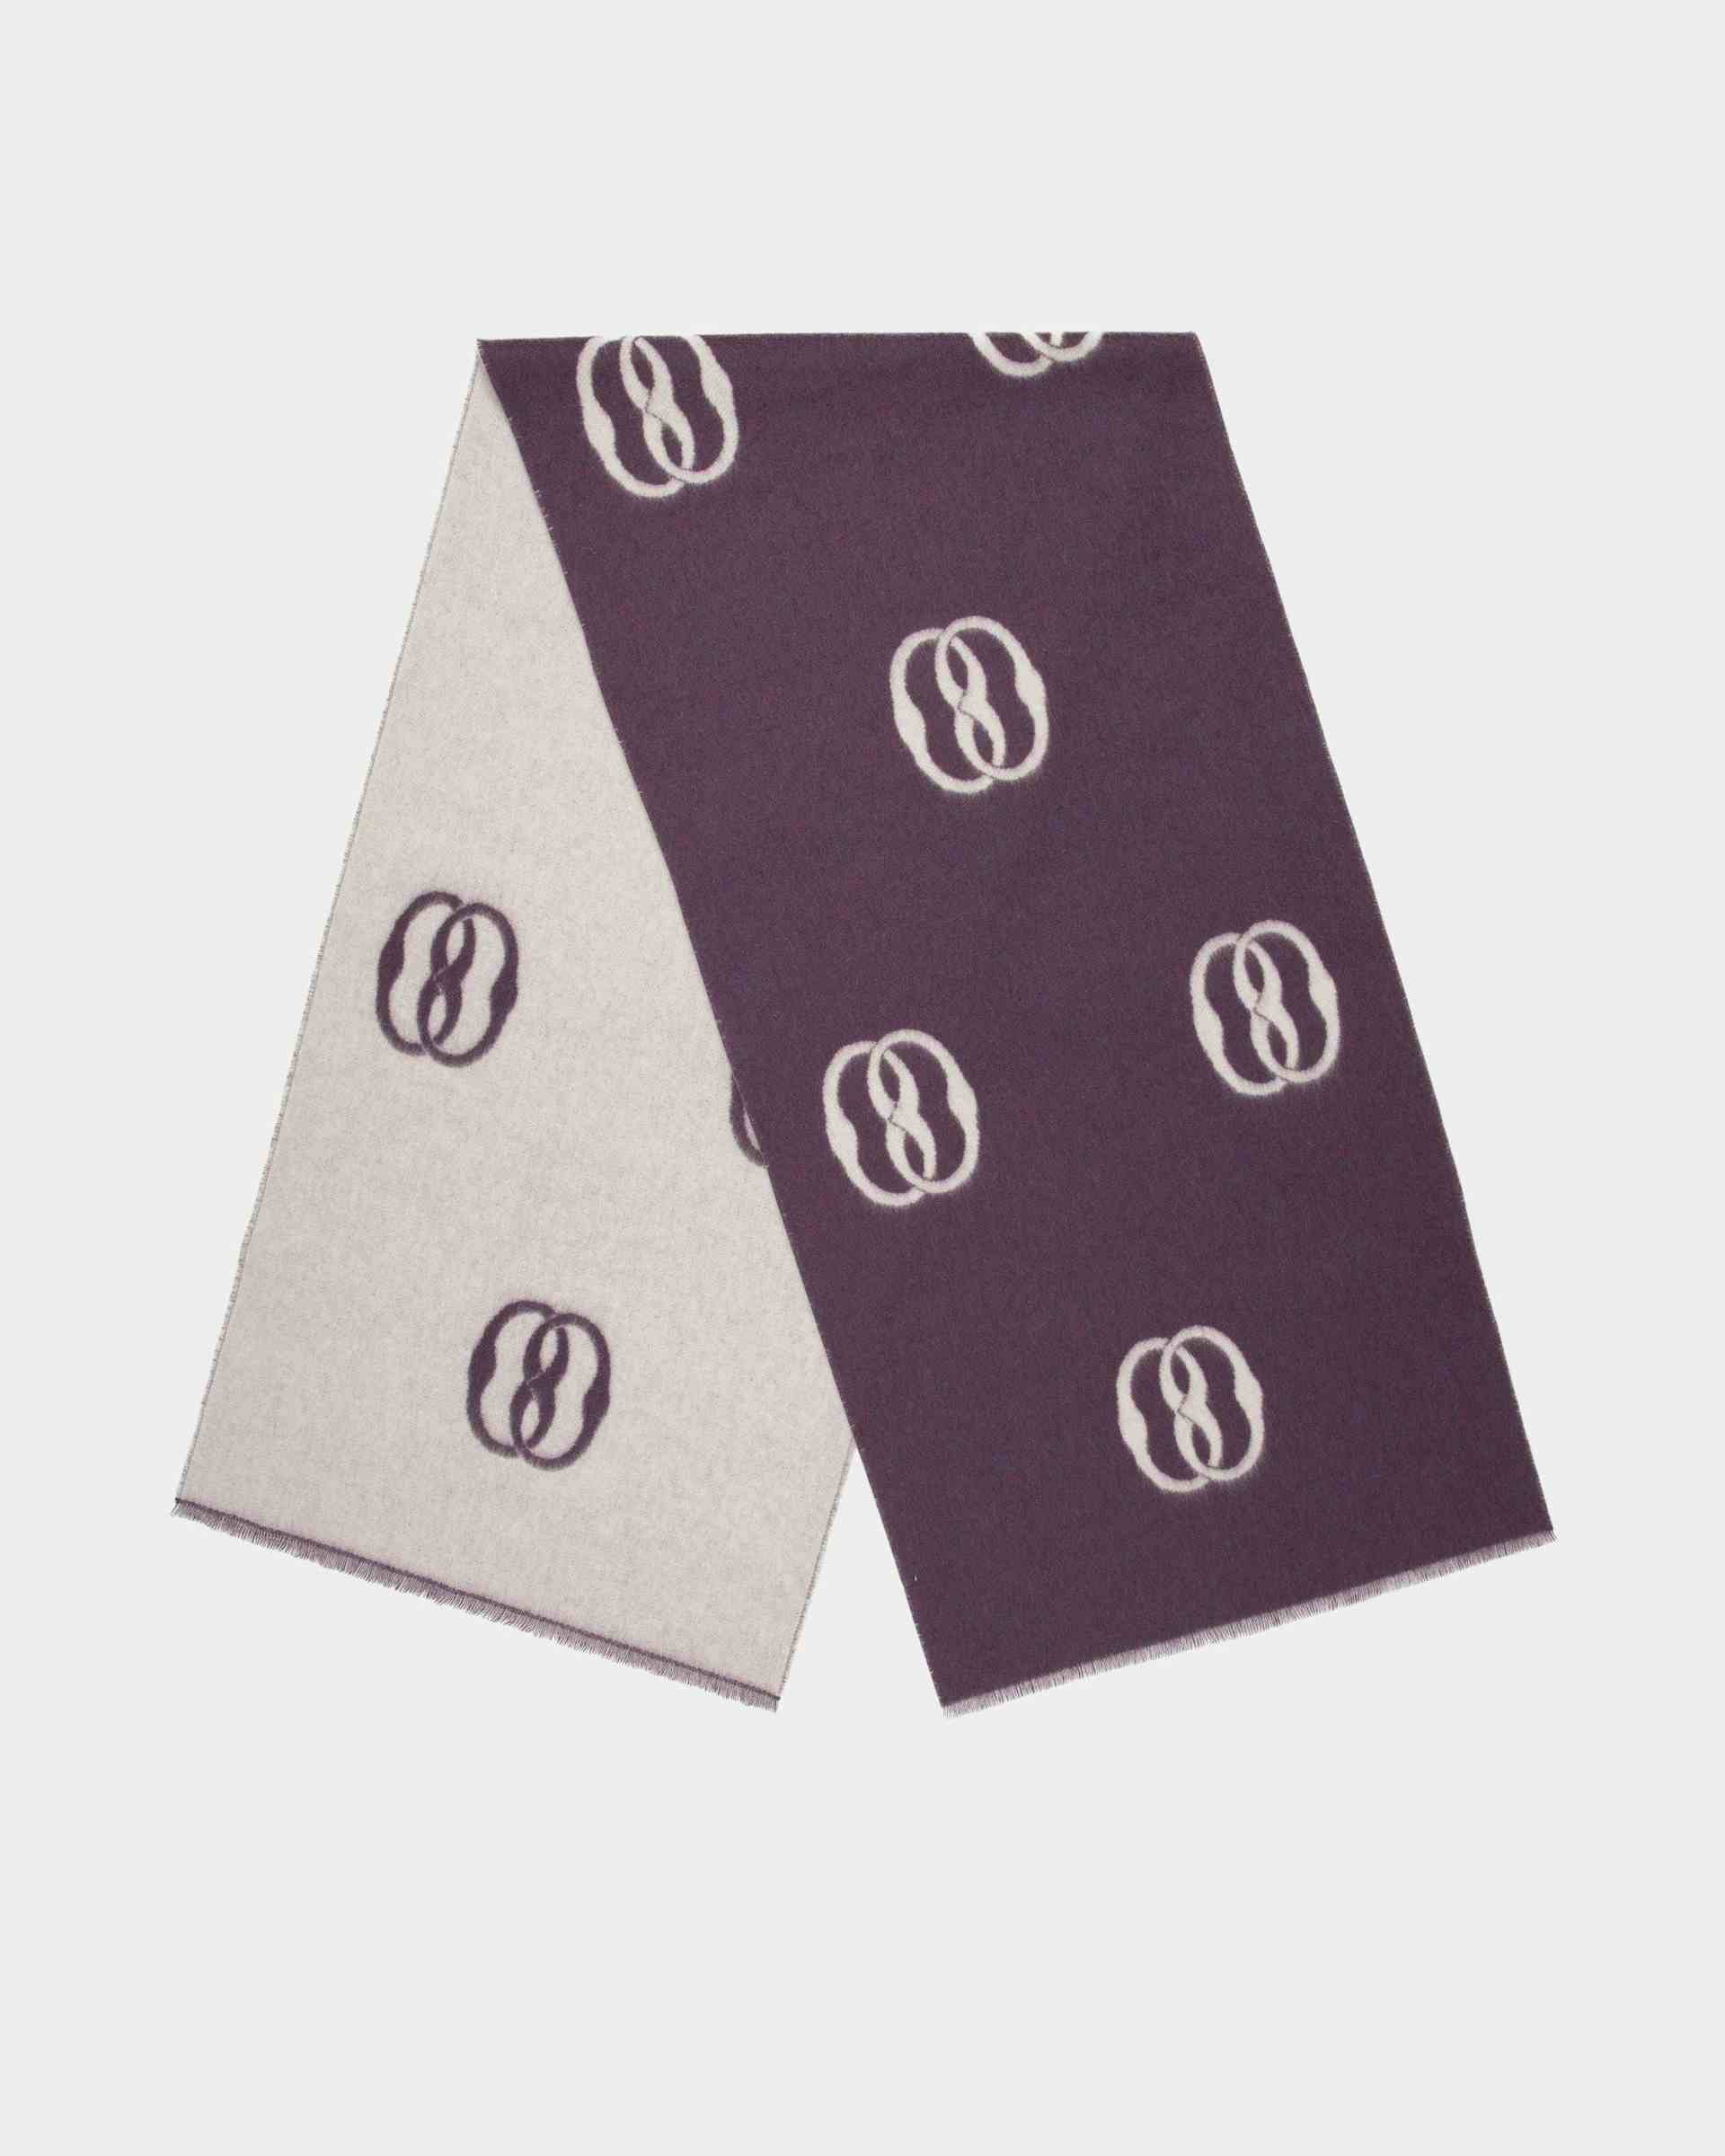 Emblem Scarf In Orchid And Dusty White Fabric - Women's - Bally